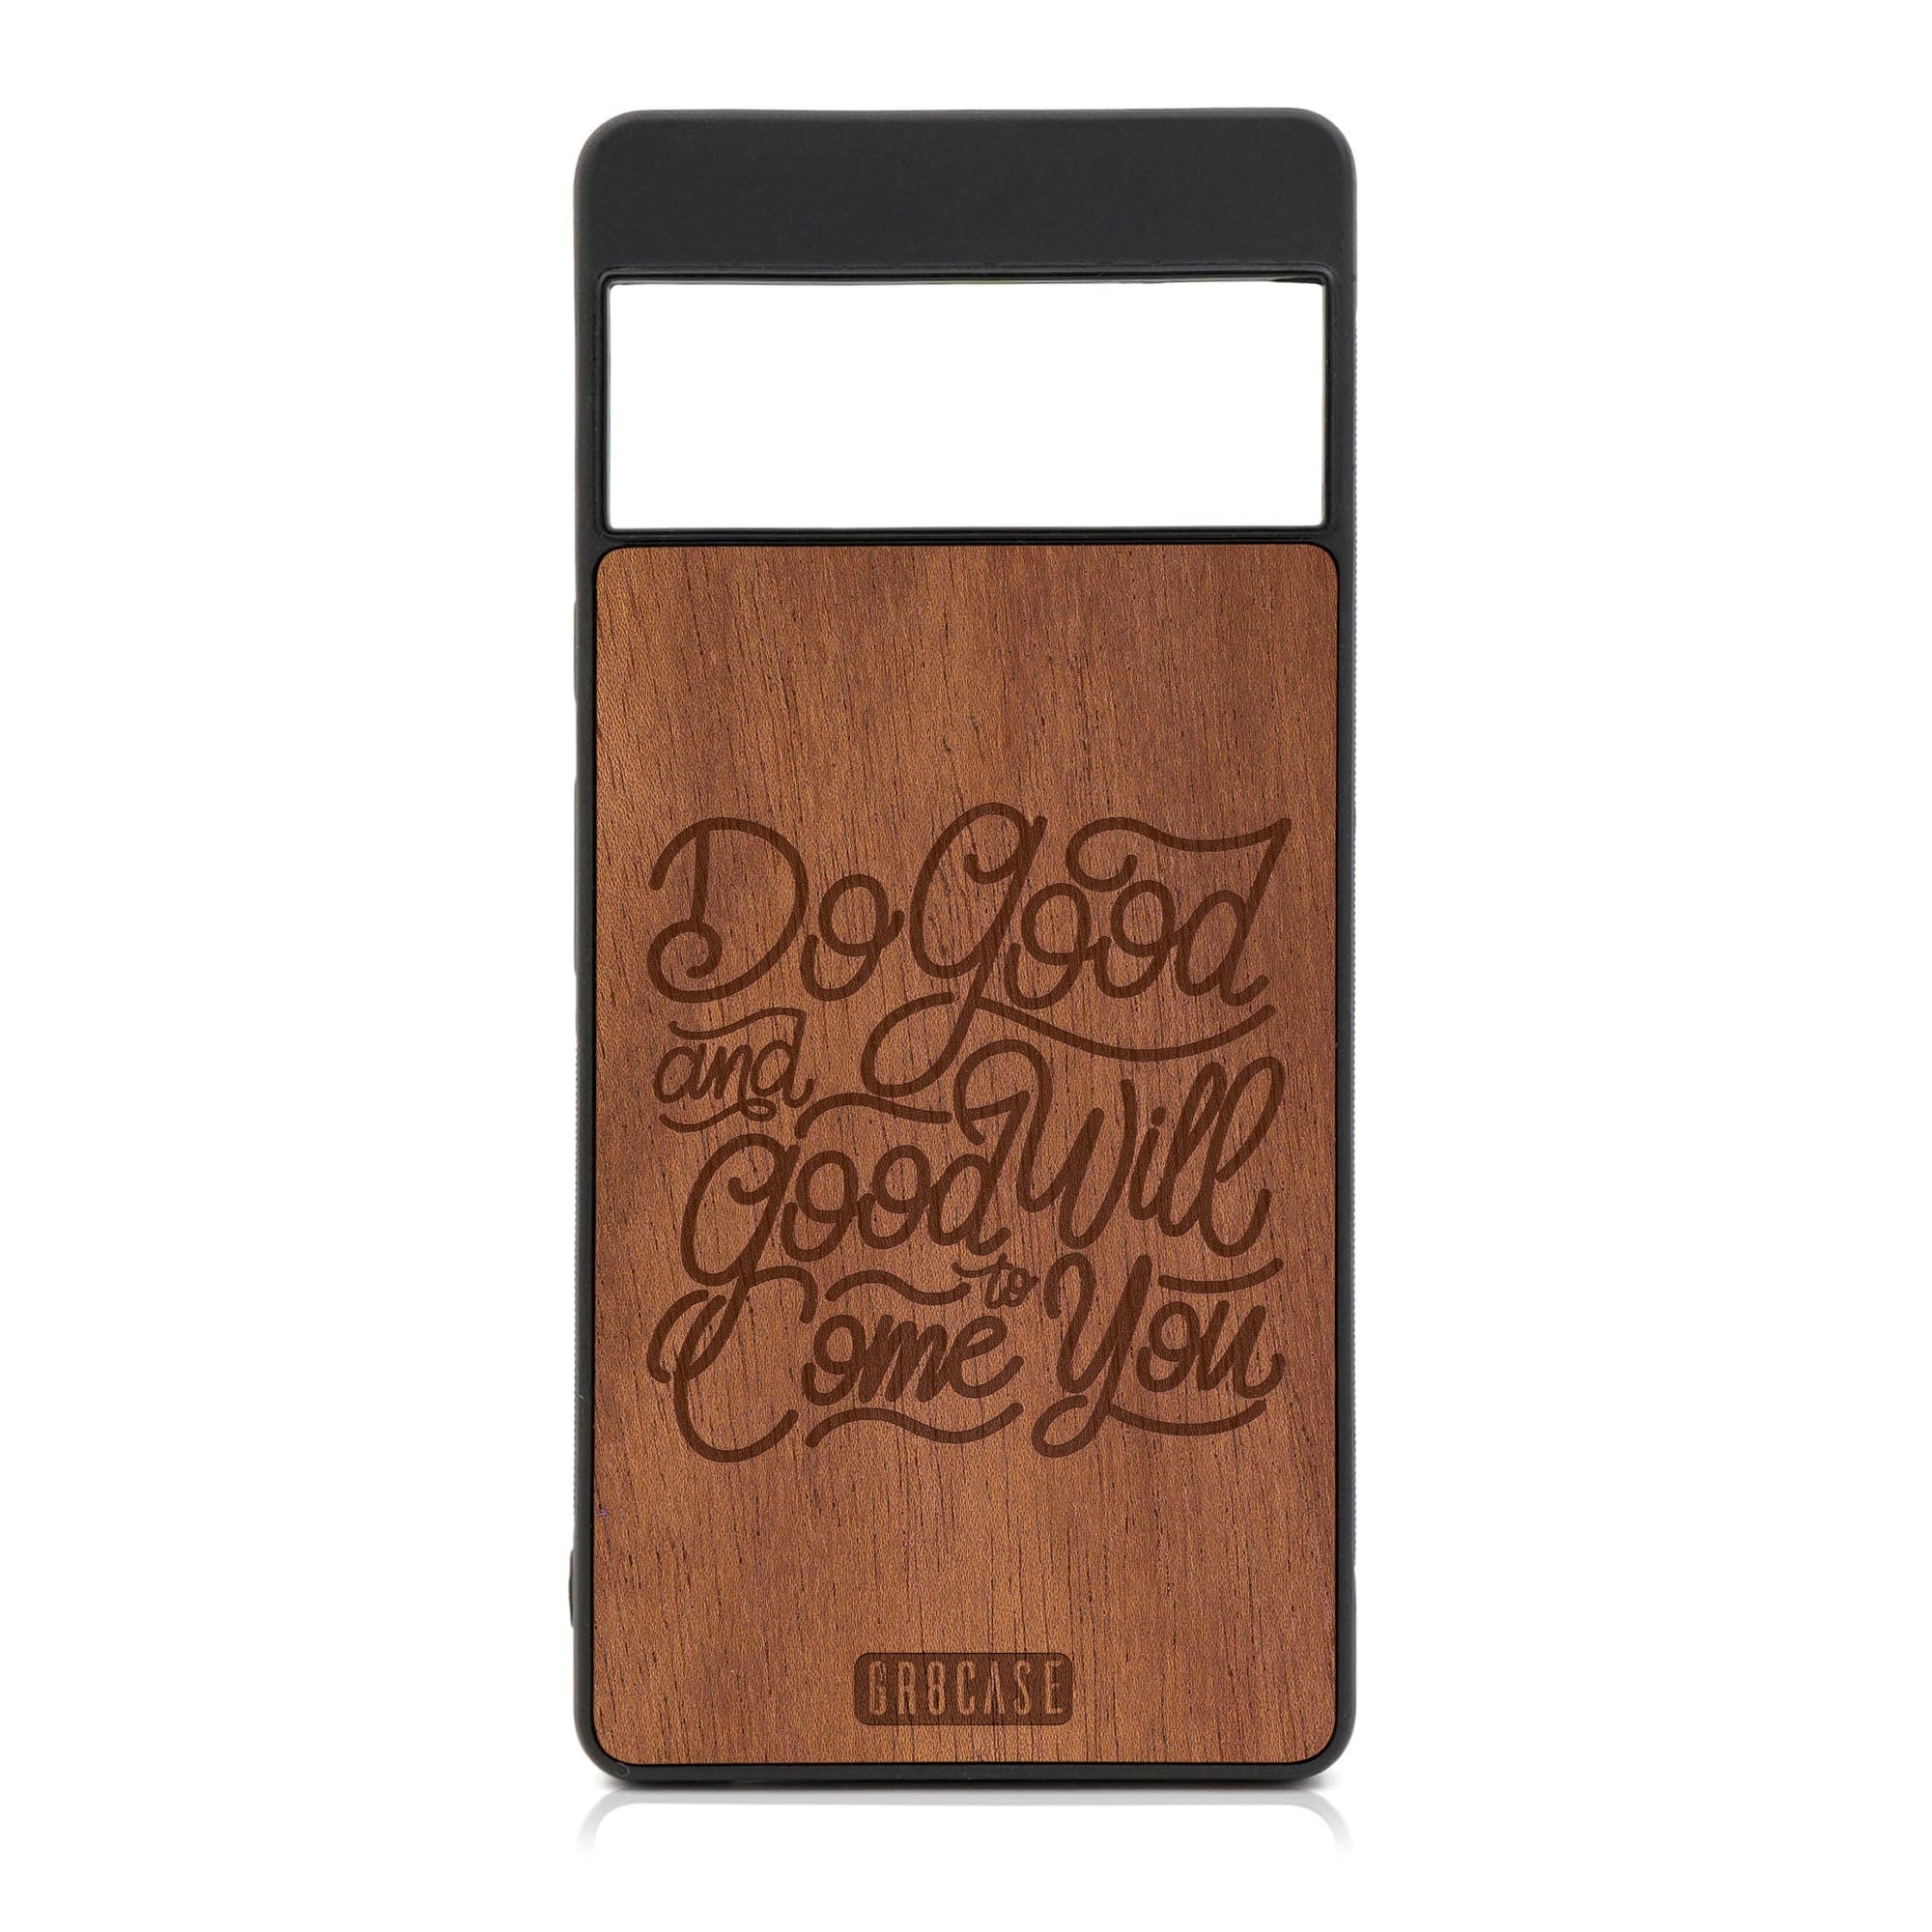 Do Good And Good Will Come To You Design Wood Case For Google Pixel 7